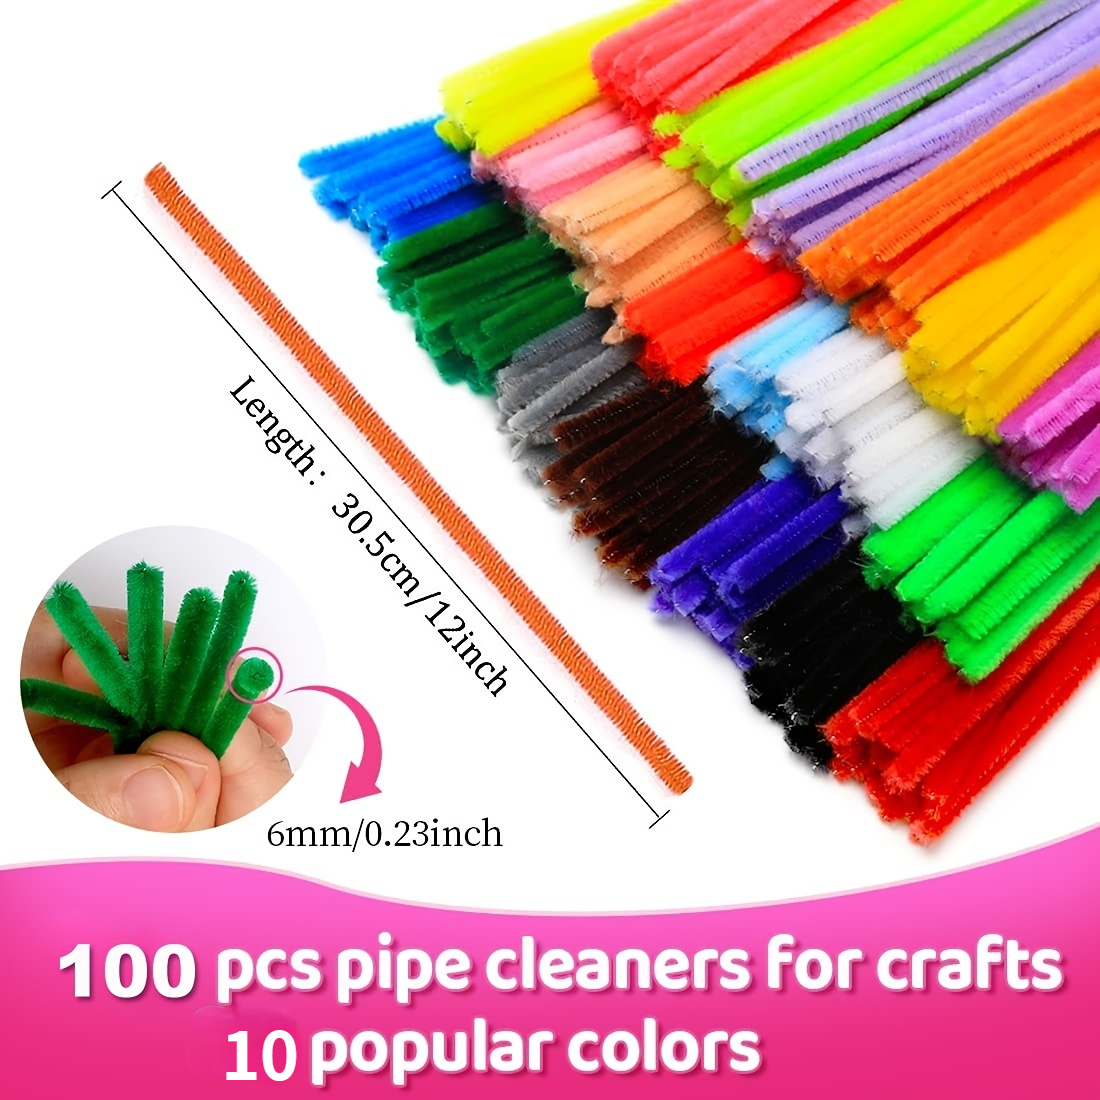 10 Multi-colored Pipe Cleaners, Pipe Cleaners For Crafts, Long